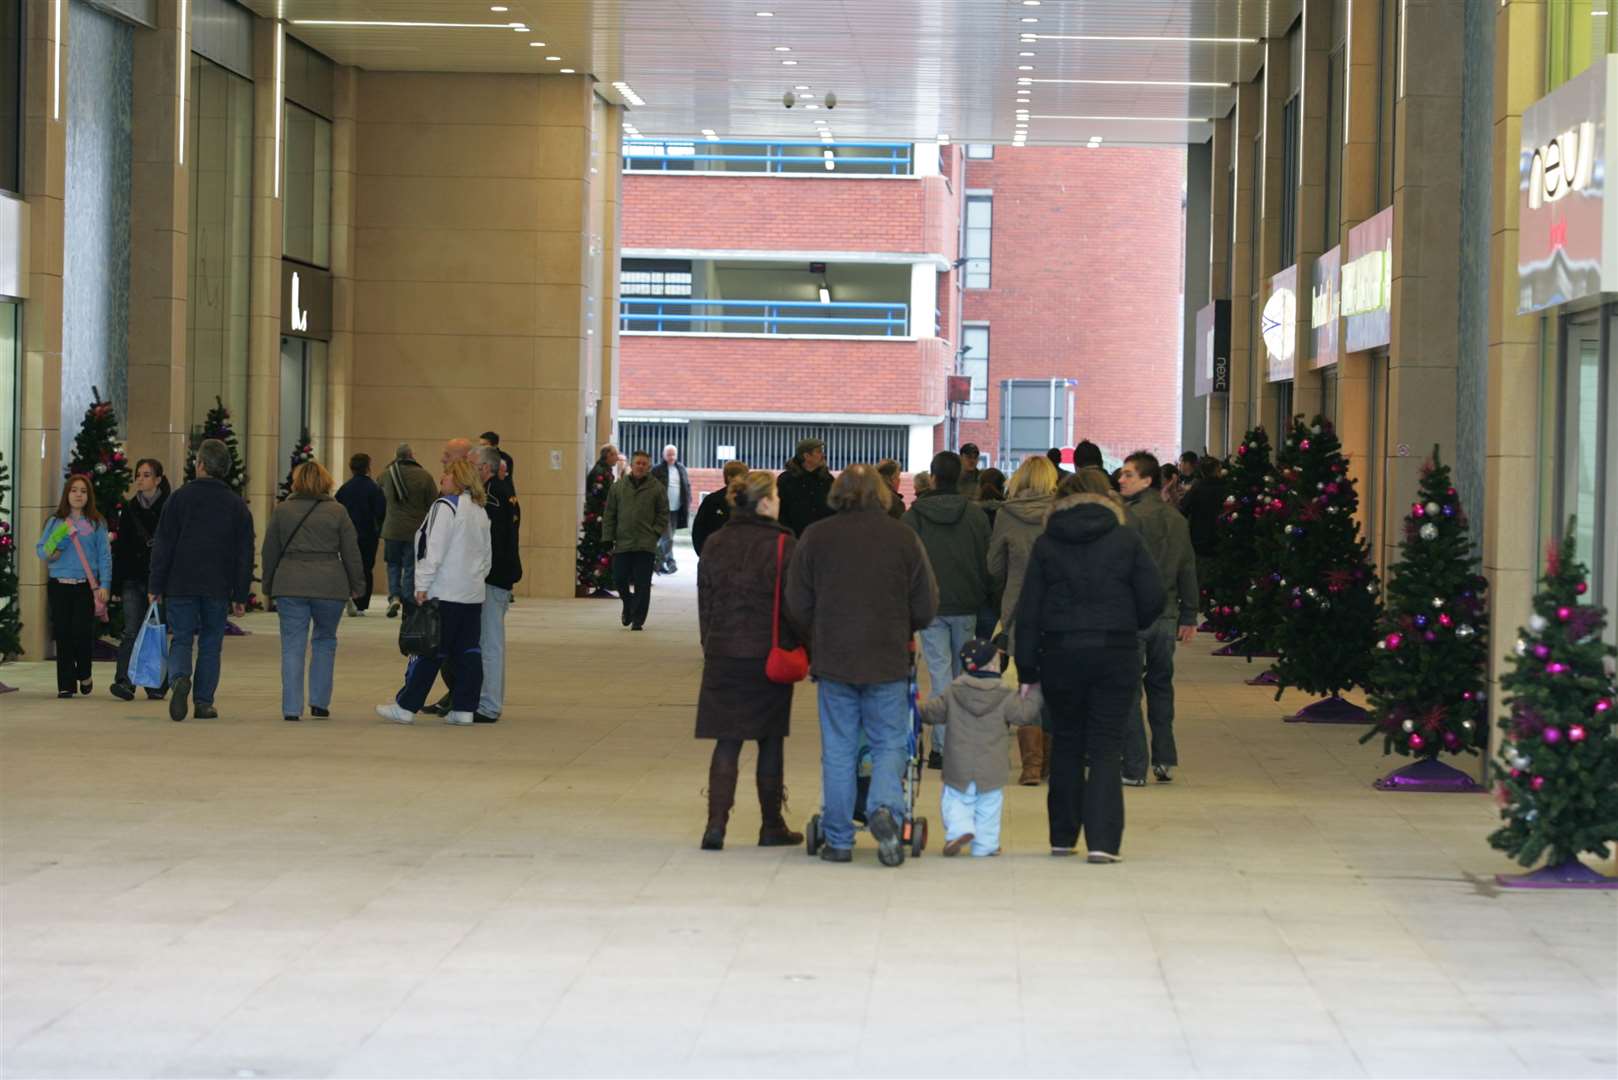 Bouverie Place in 2007, the year it opened